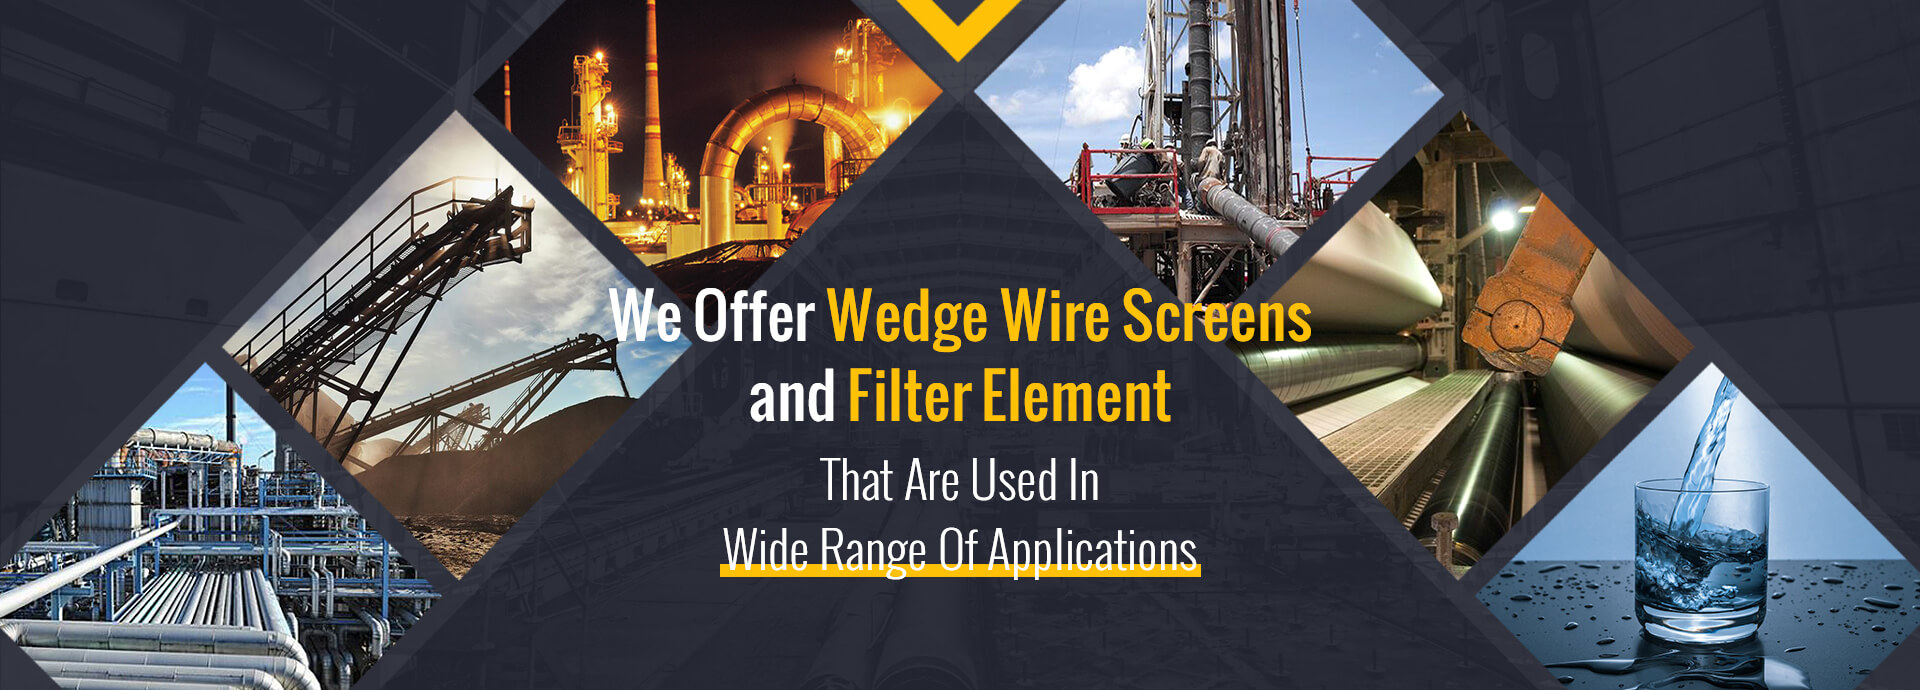 Wedge Wire Screen and filter element